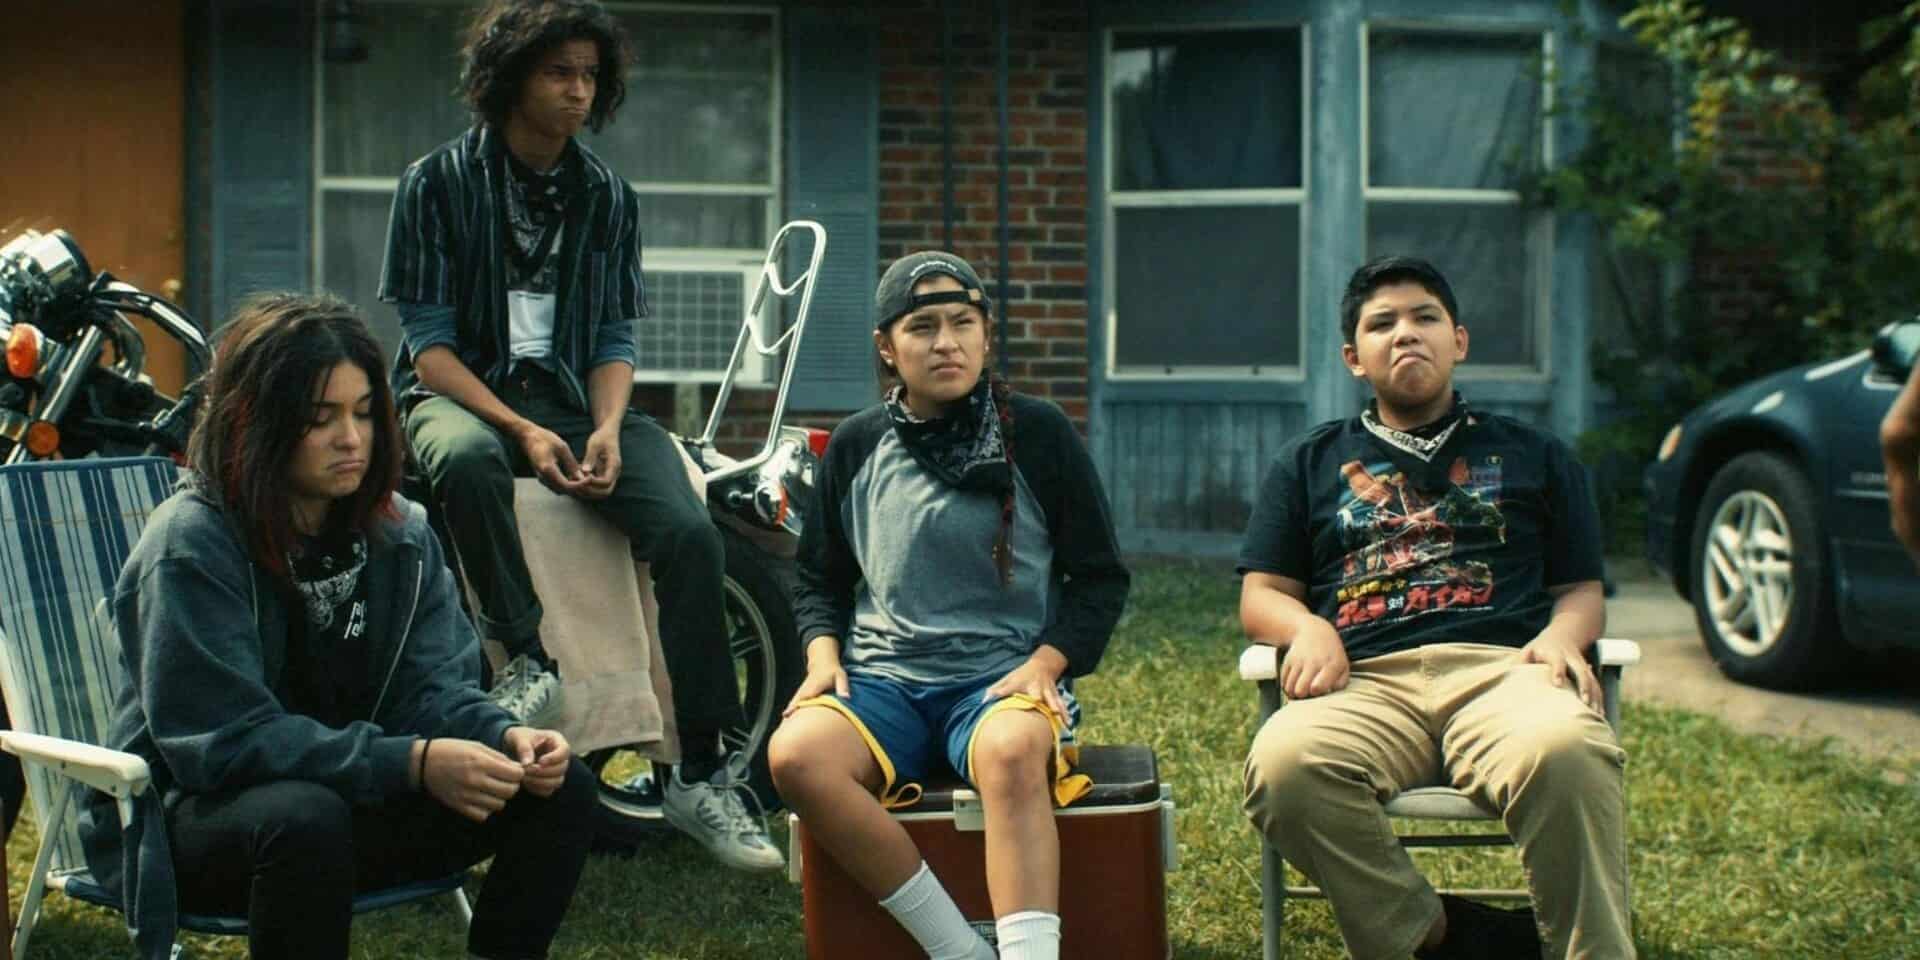 Devery Jacobs, D'Pharaoh Woon-A-Tai, Paulina Alexis, and Lane Factor sit in a front yard in this image from FXP